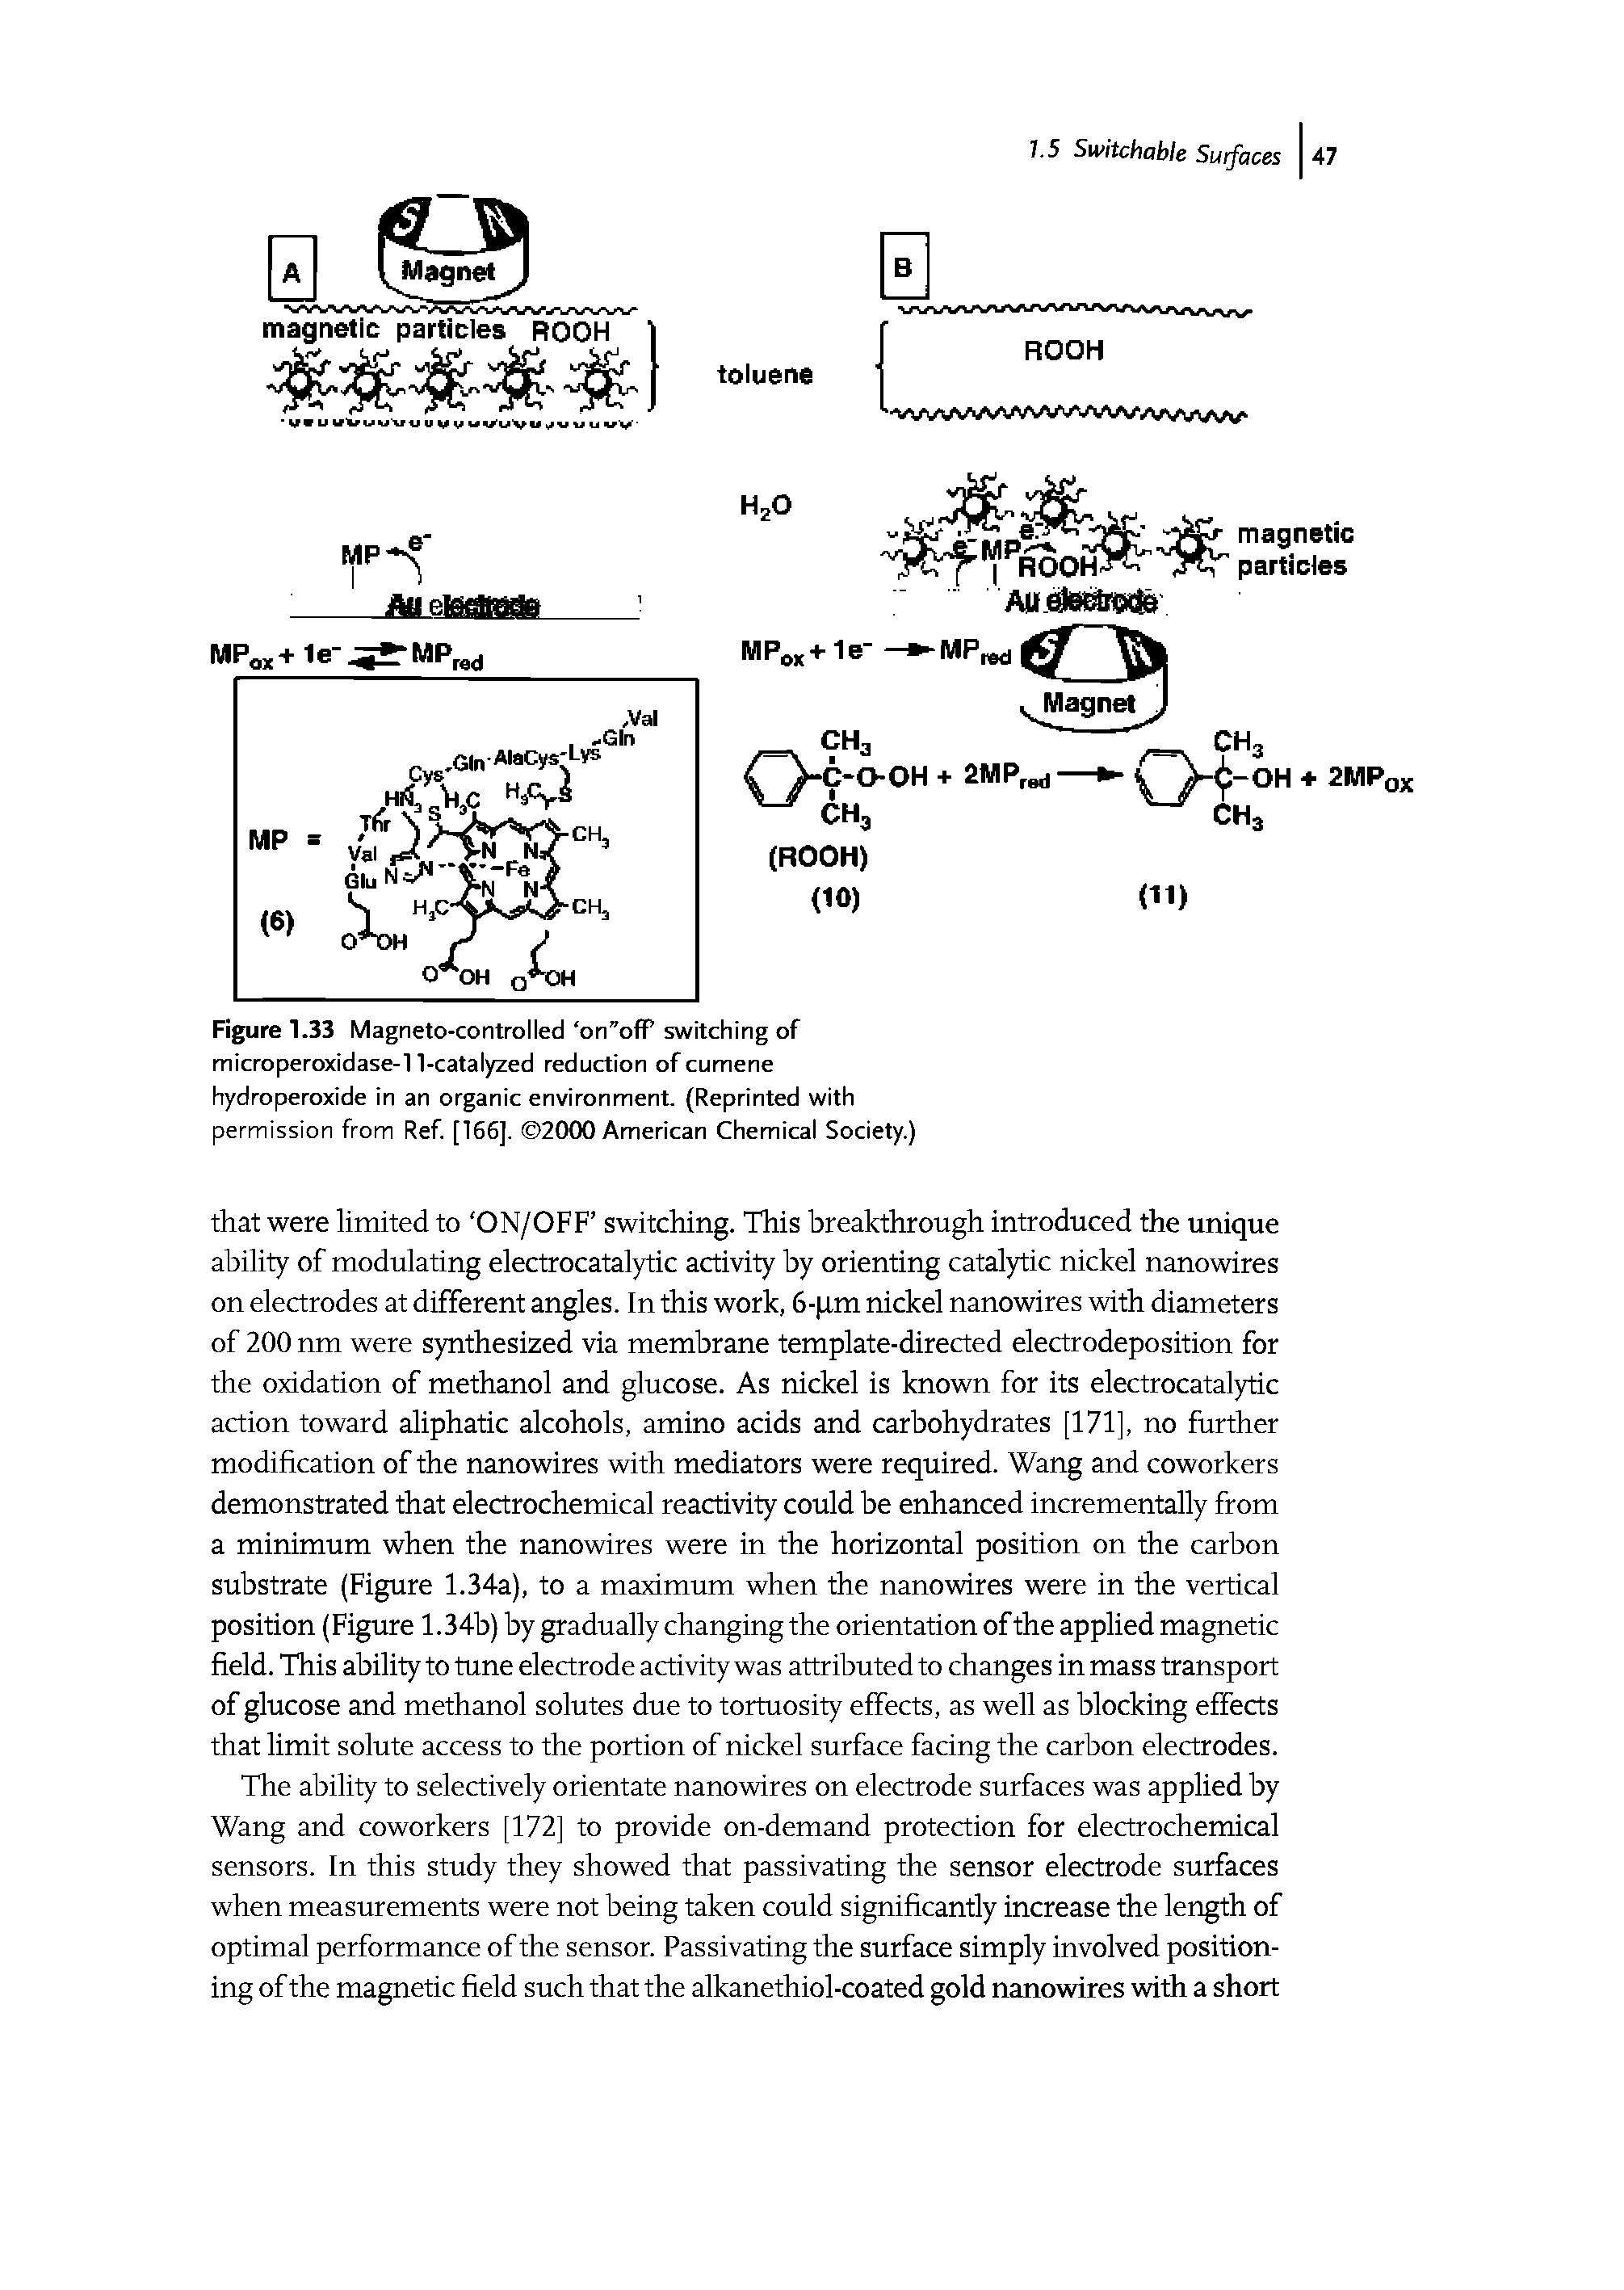 Figure 1.33 Magneto-controlled on ofP switching of microperoxidase-11-catalyzed reduction of cumene hydroperoxide in an organic environment. (Reprinted with permission from Ref [166]. 2000 American Chemical Society.)...